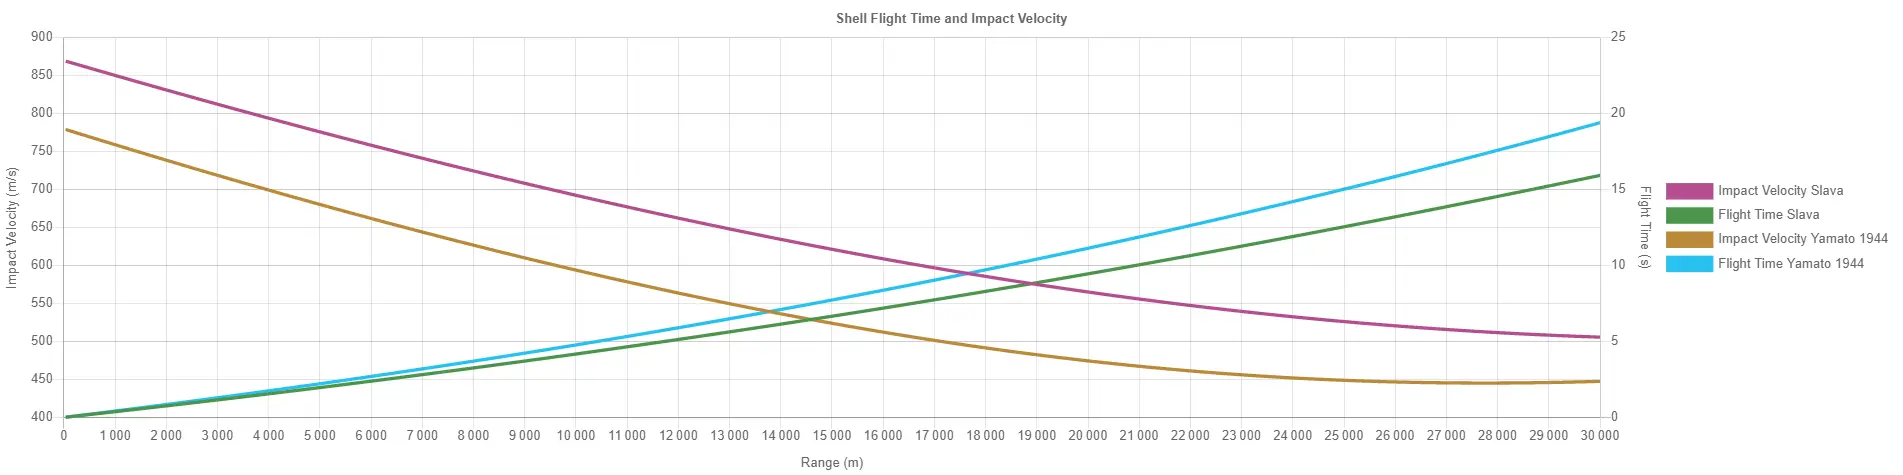 Shell Flight Time and Impact Velocity